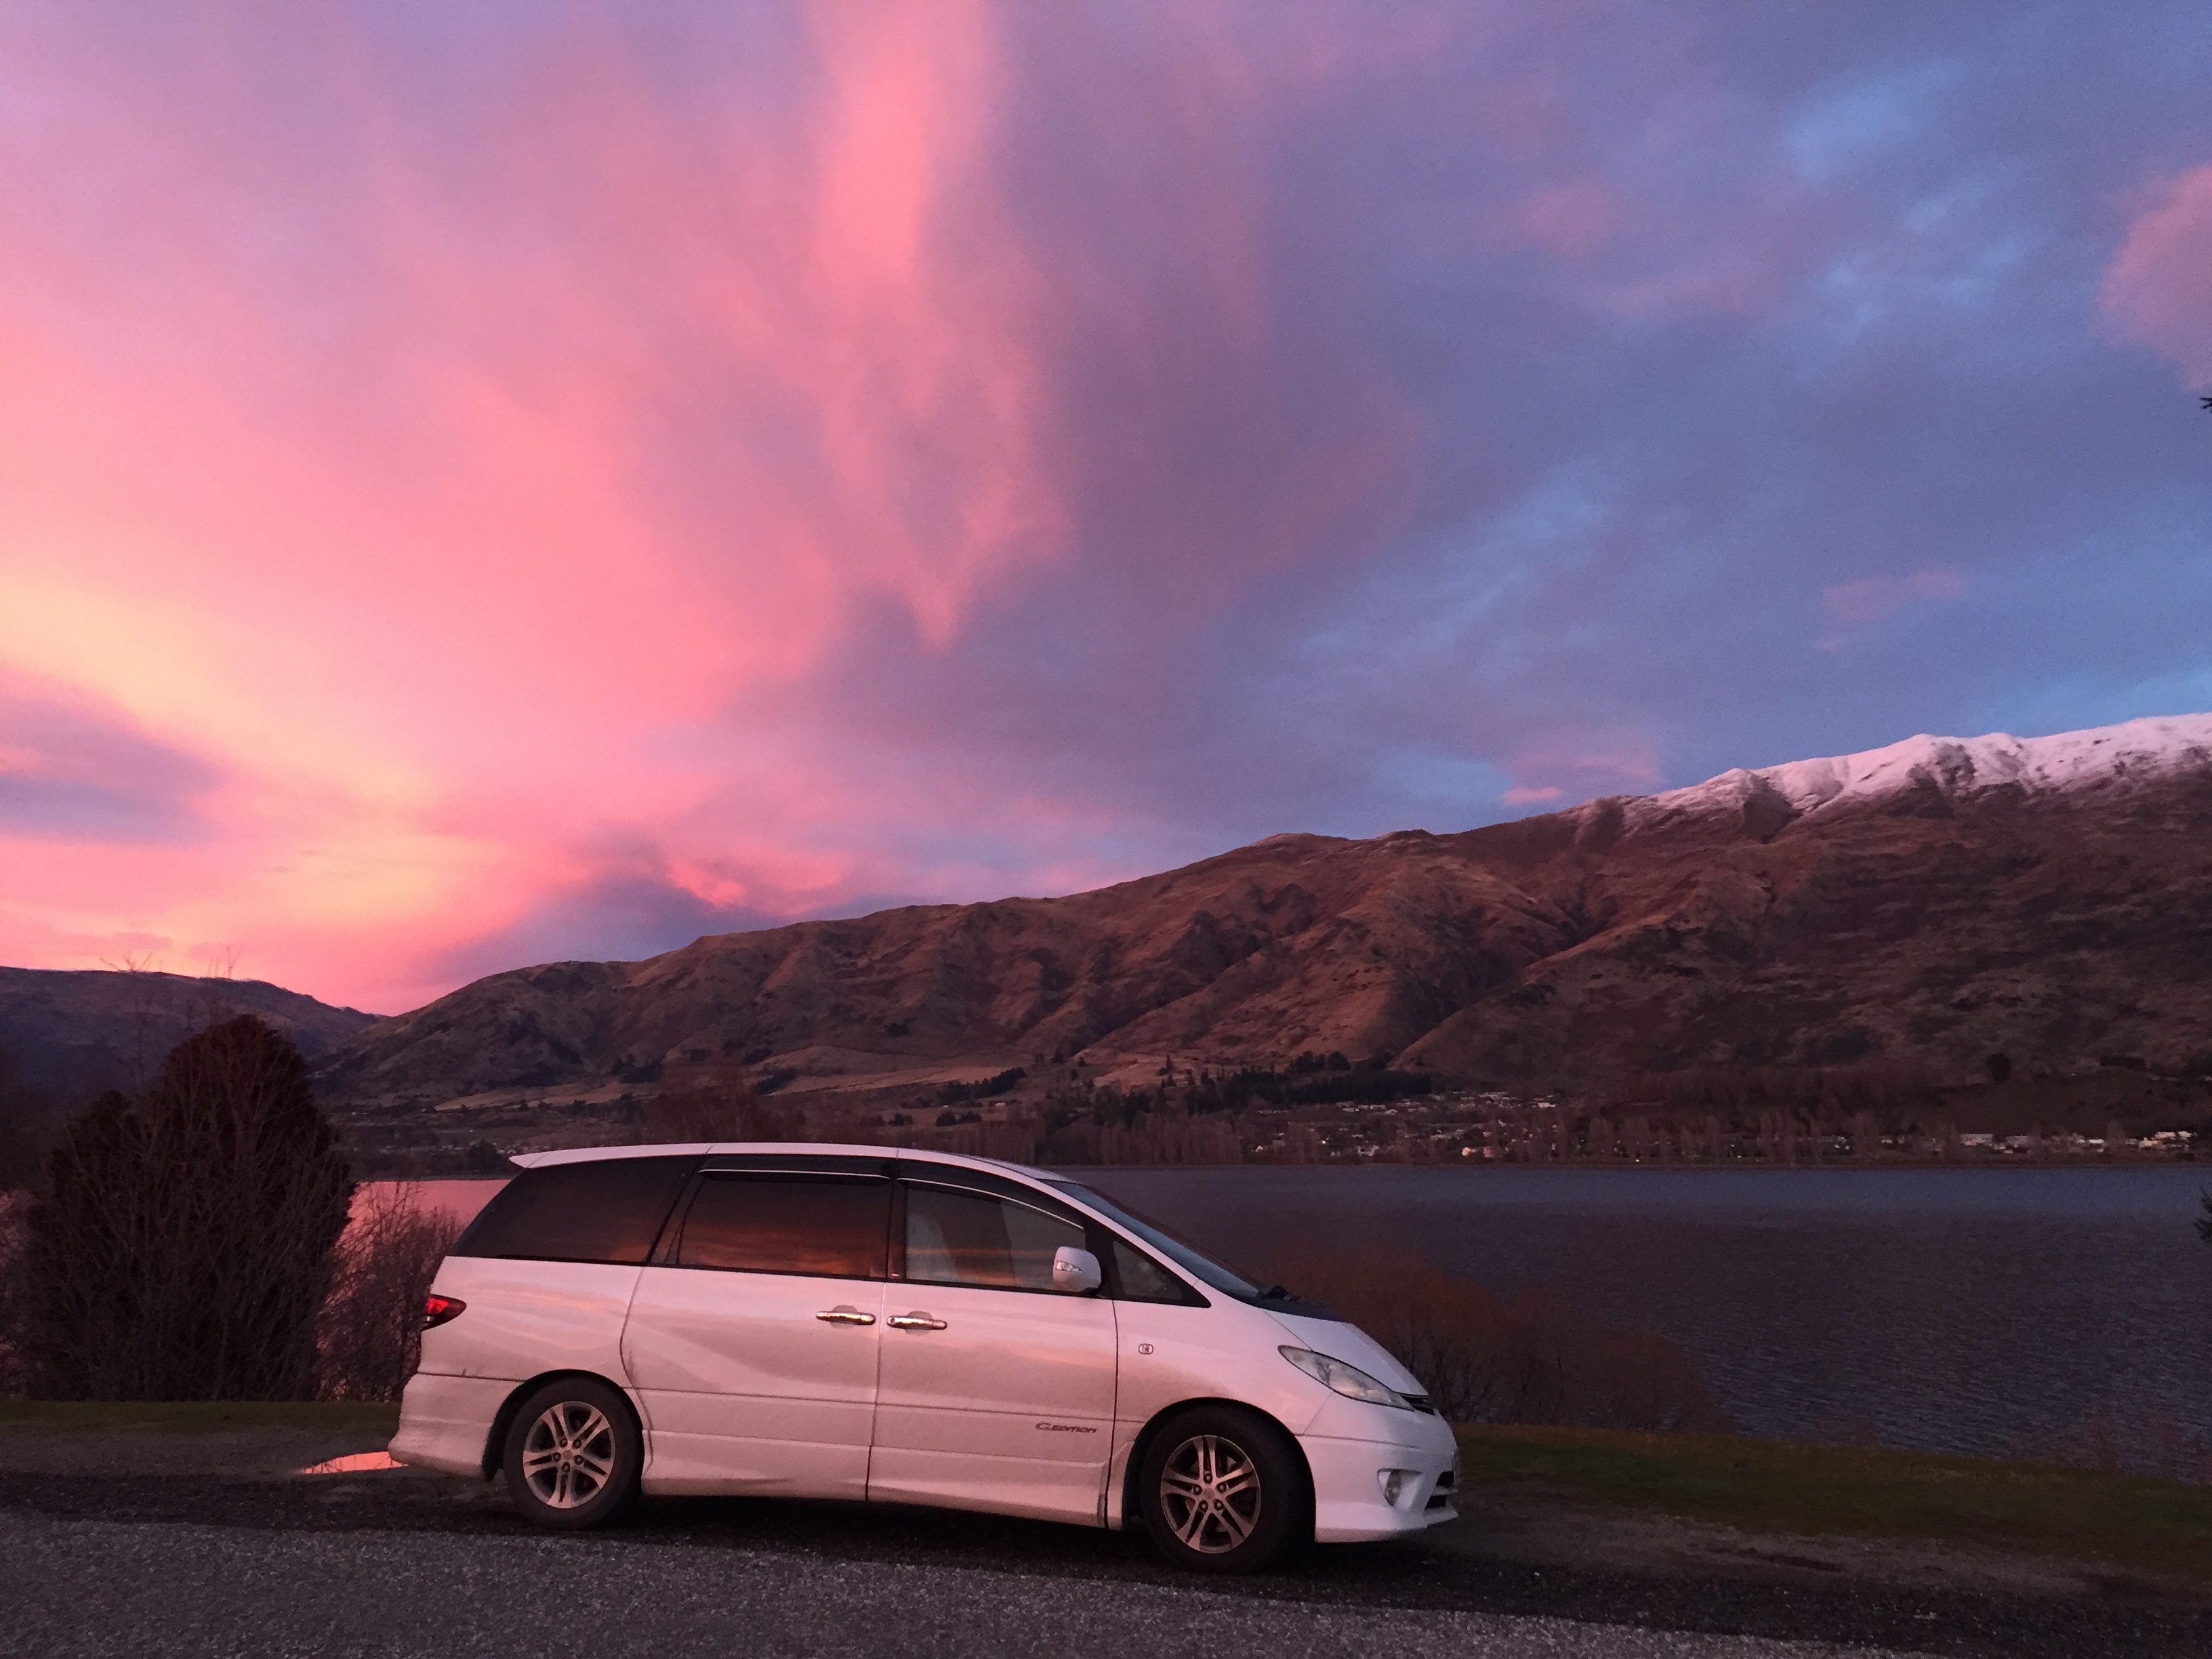 The sunset at Wanaka camp site 